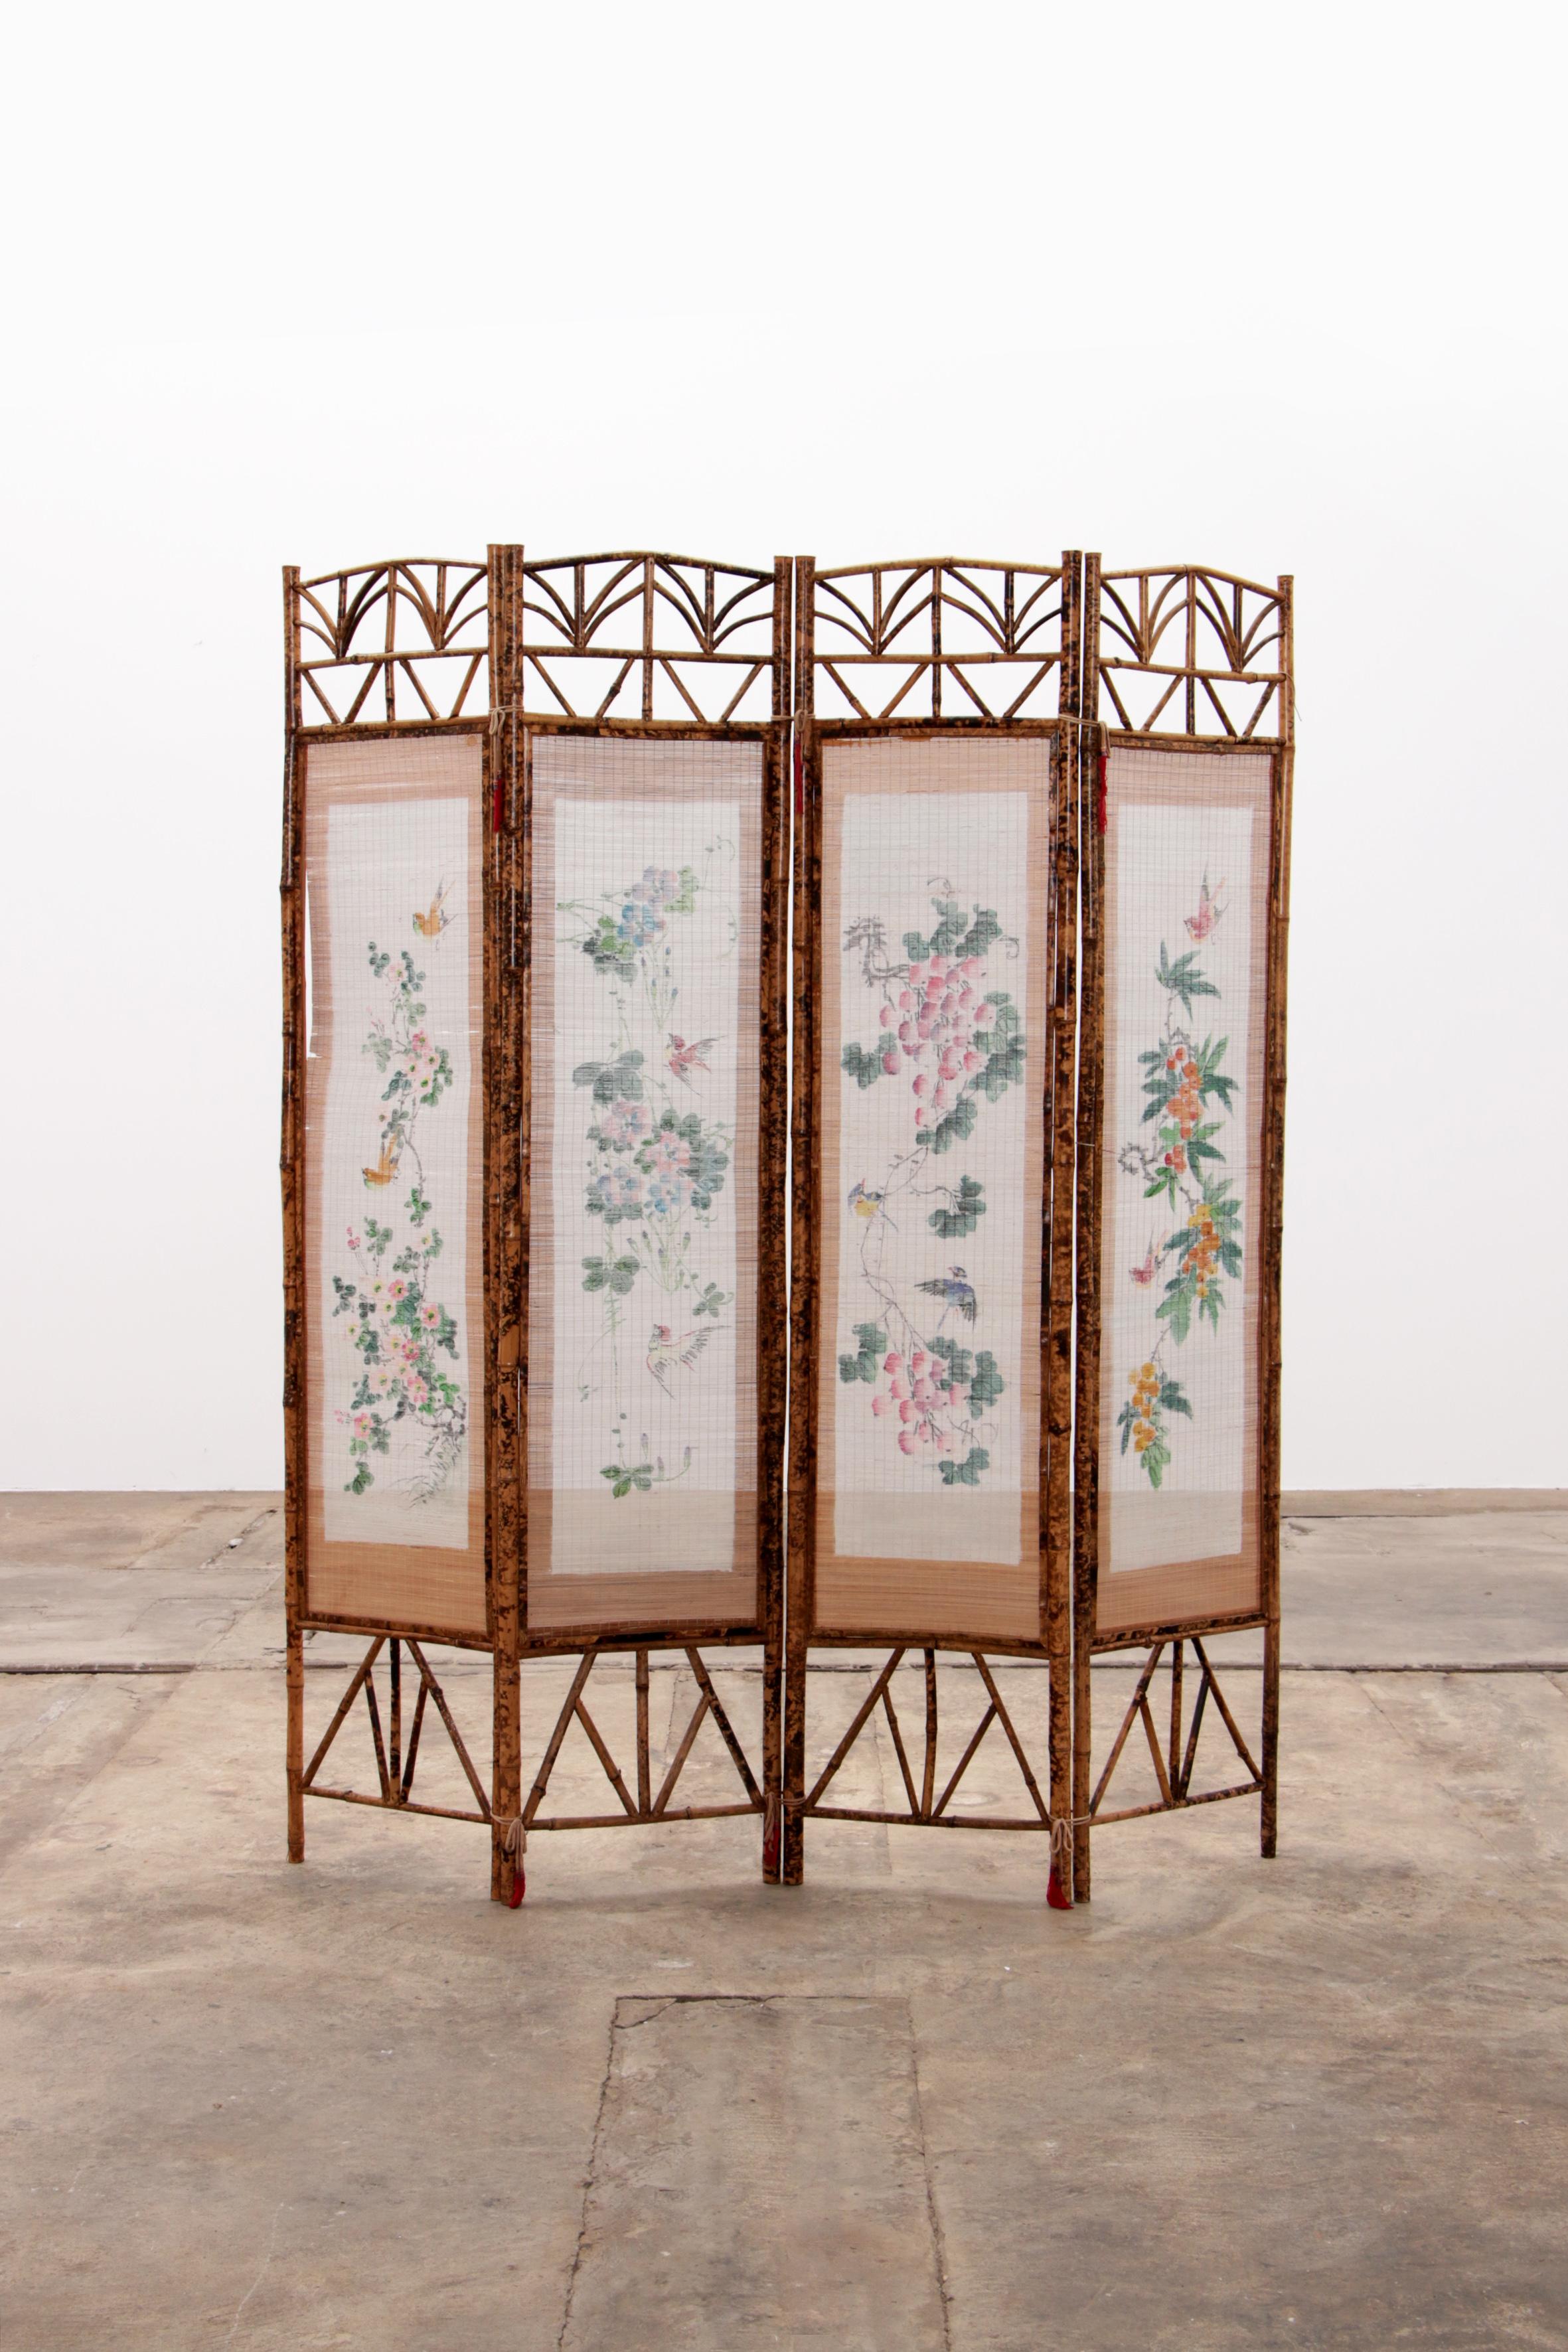 Mid-Century Modern bamboo wooden folding screen, screen or partition with four wall panels. Bamboo in combination with a beautiful drawing of flowers and birds in cheerful colors landscape on fabric. Beautifully finished with fabric cords.

Boho